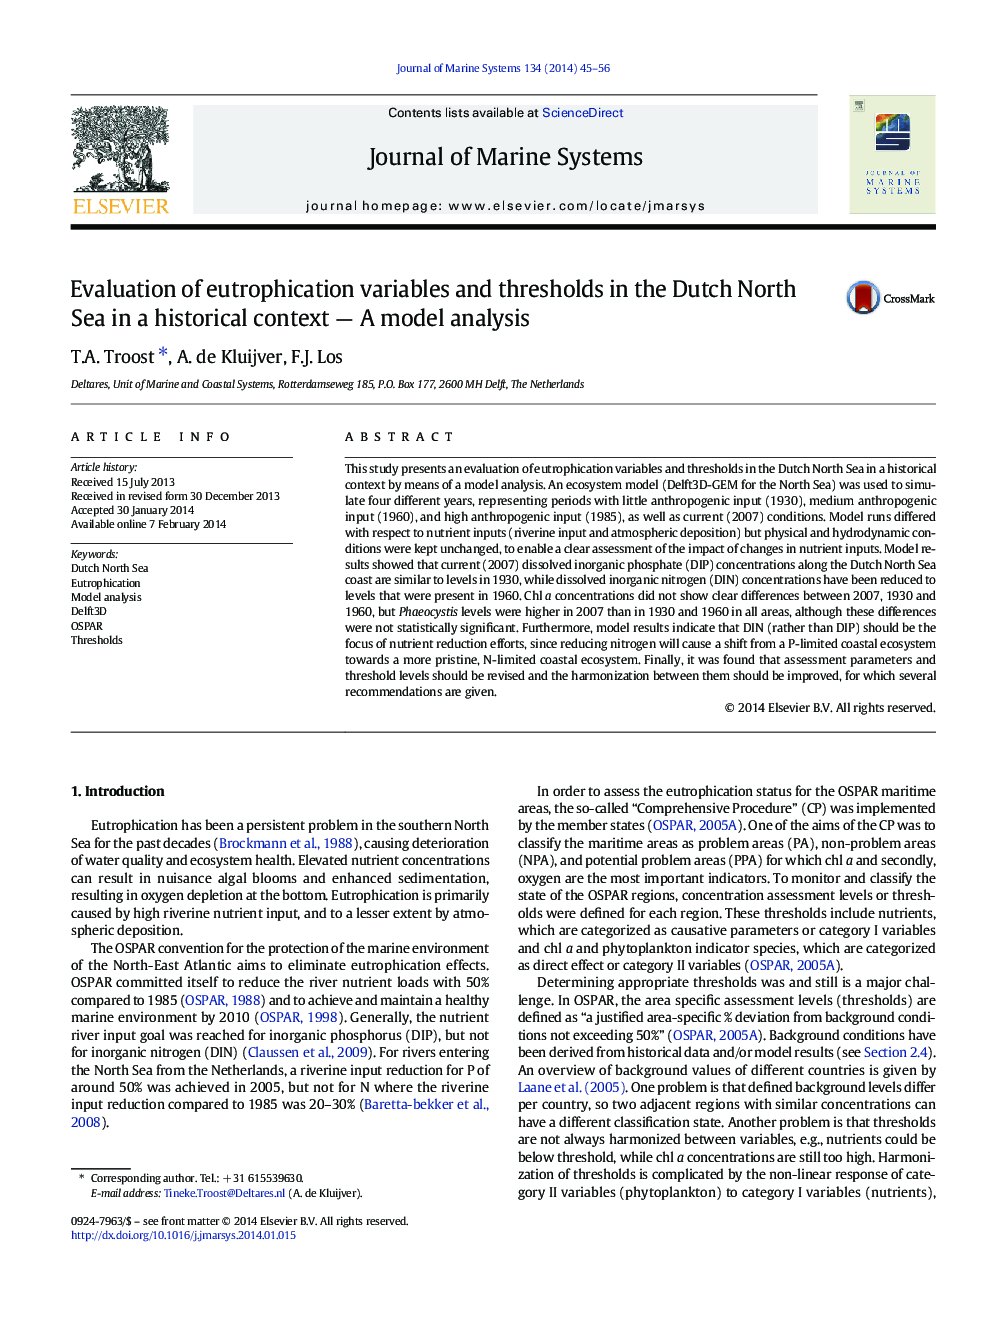 Evaluation of eutrophication variables and thresholds in the Dutch North Sea in a historical context — A model analysis